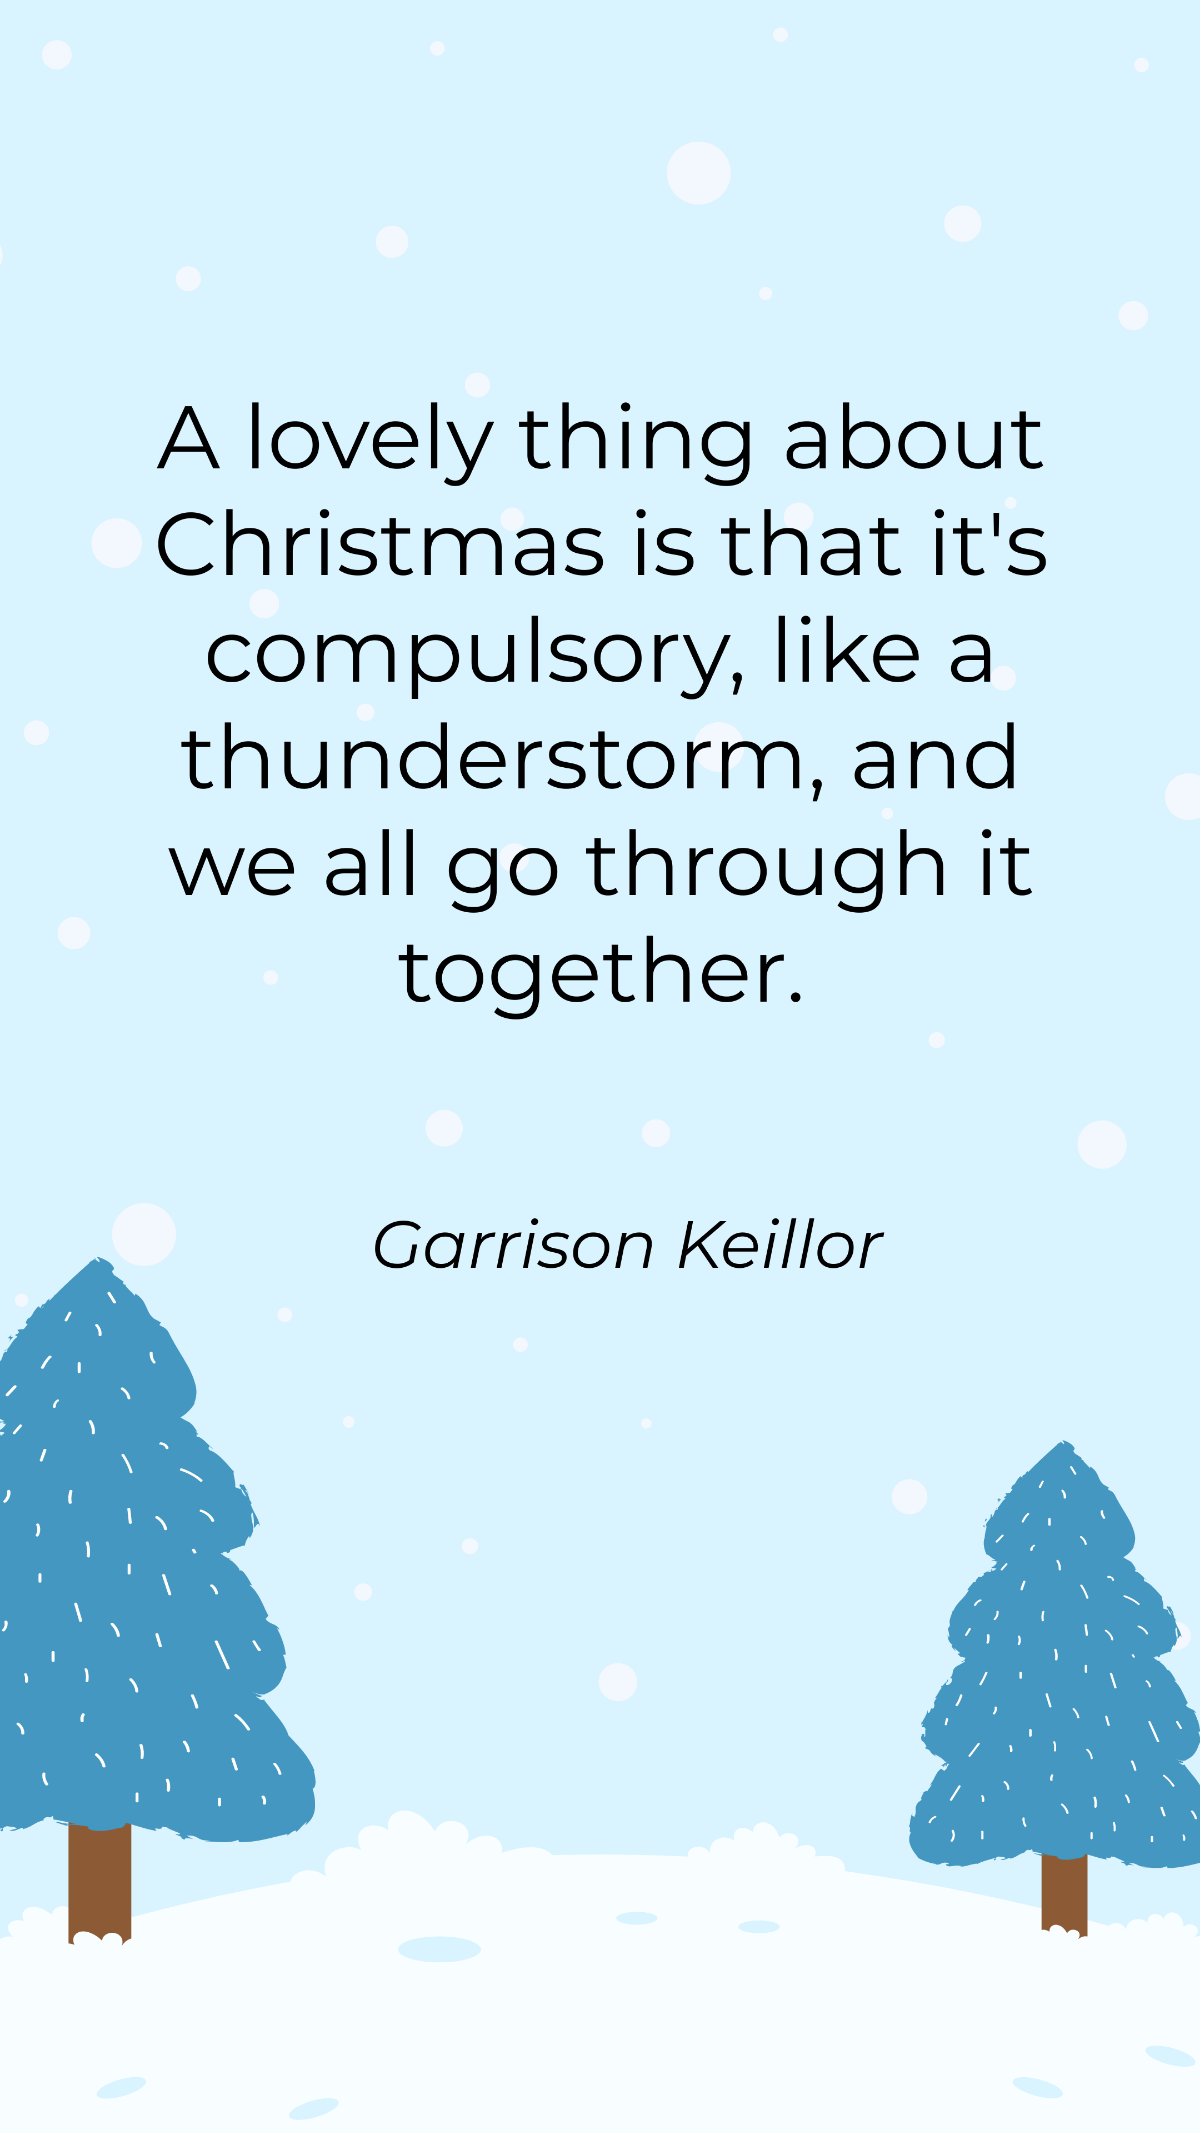 Garrison Keillor - A lovely thing about Christmas is that it's compulsory, like a thunderstorm, and we all go through it together. Template